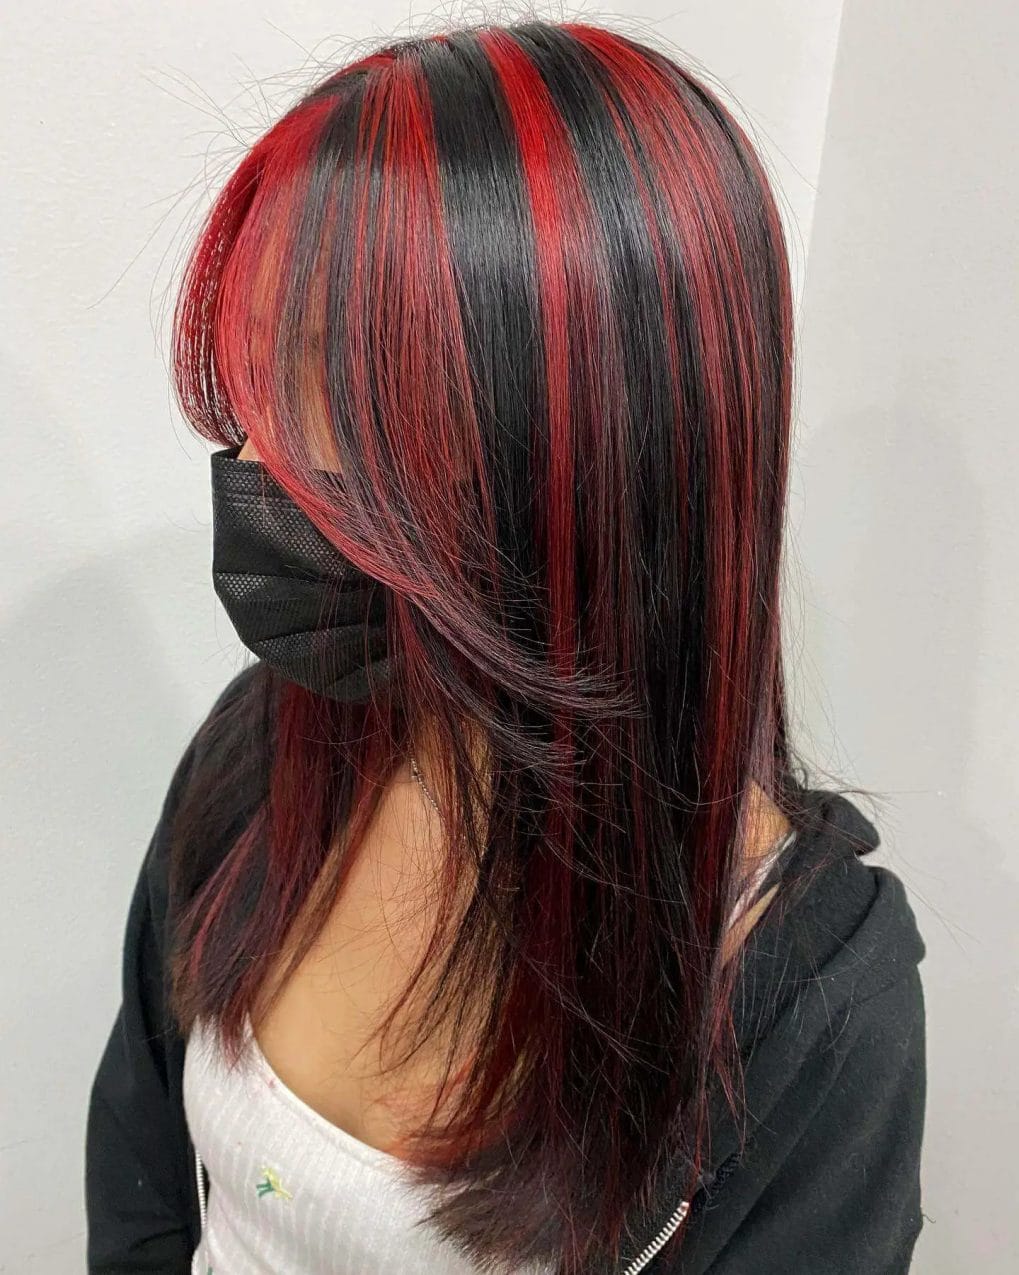 Shoulder-length with red chunky highlights on black, textured layers framing face.